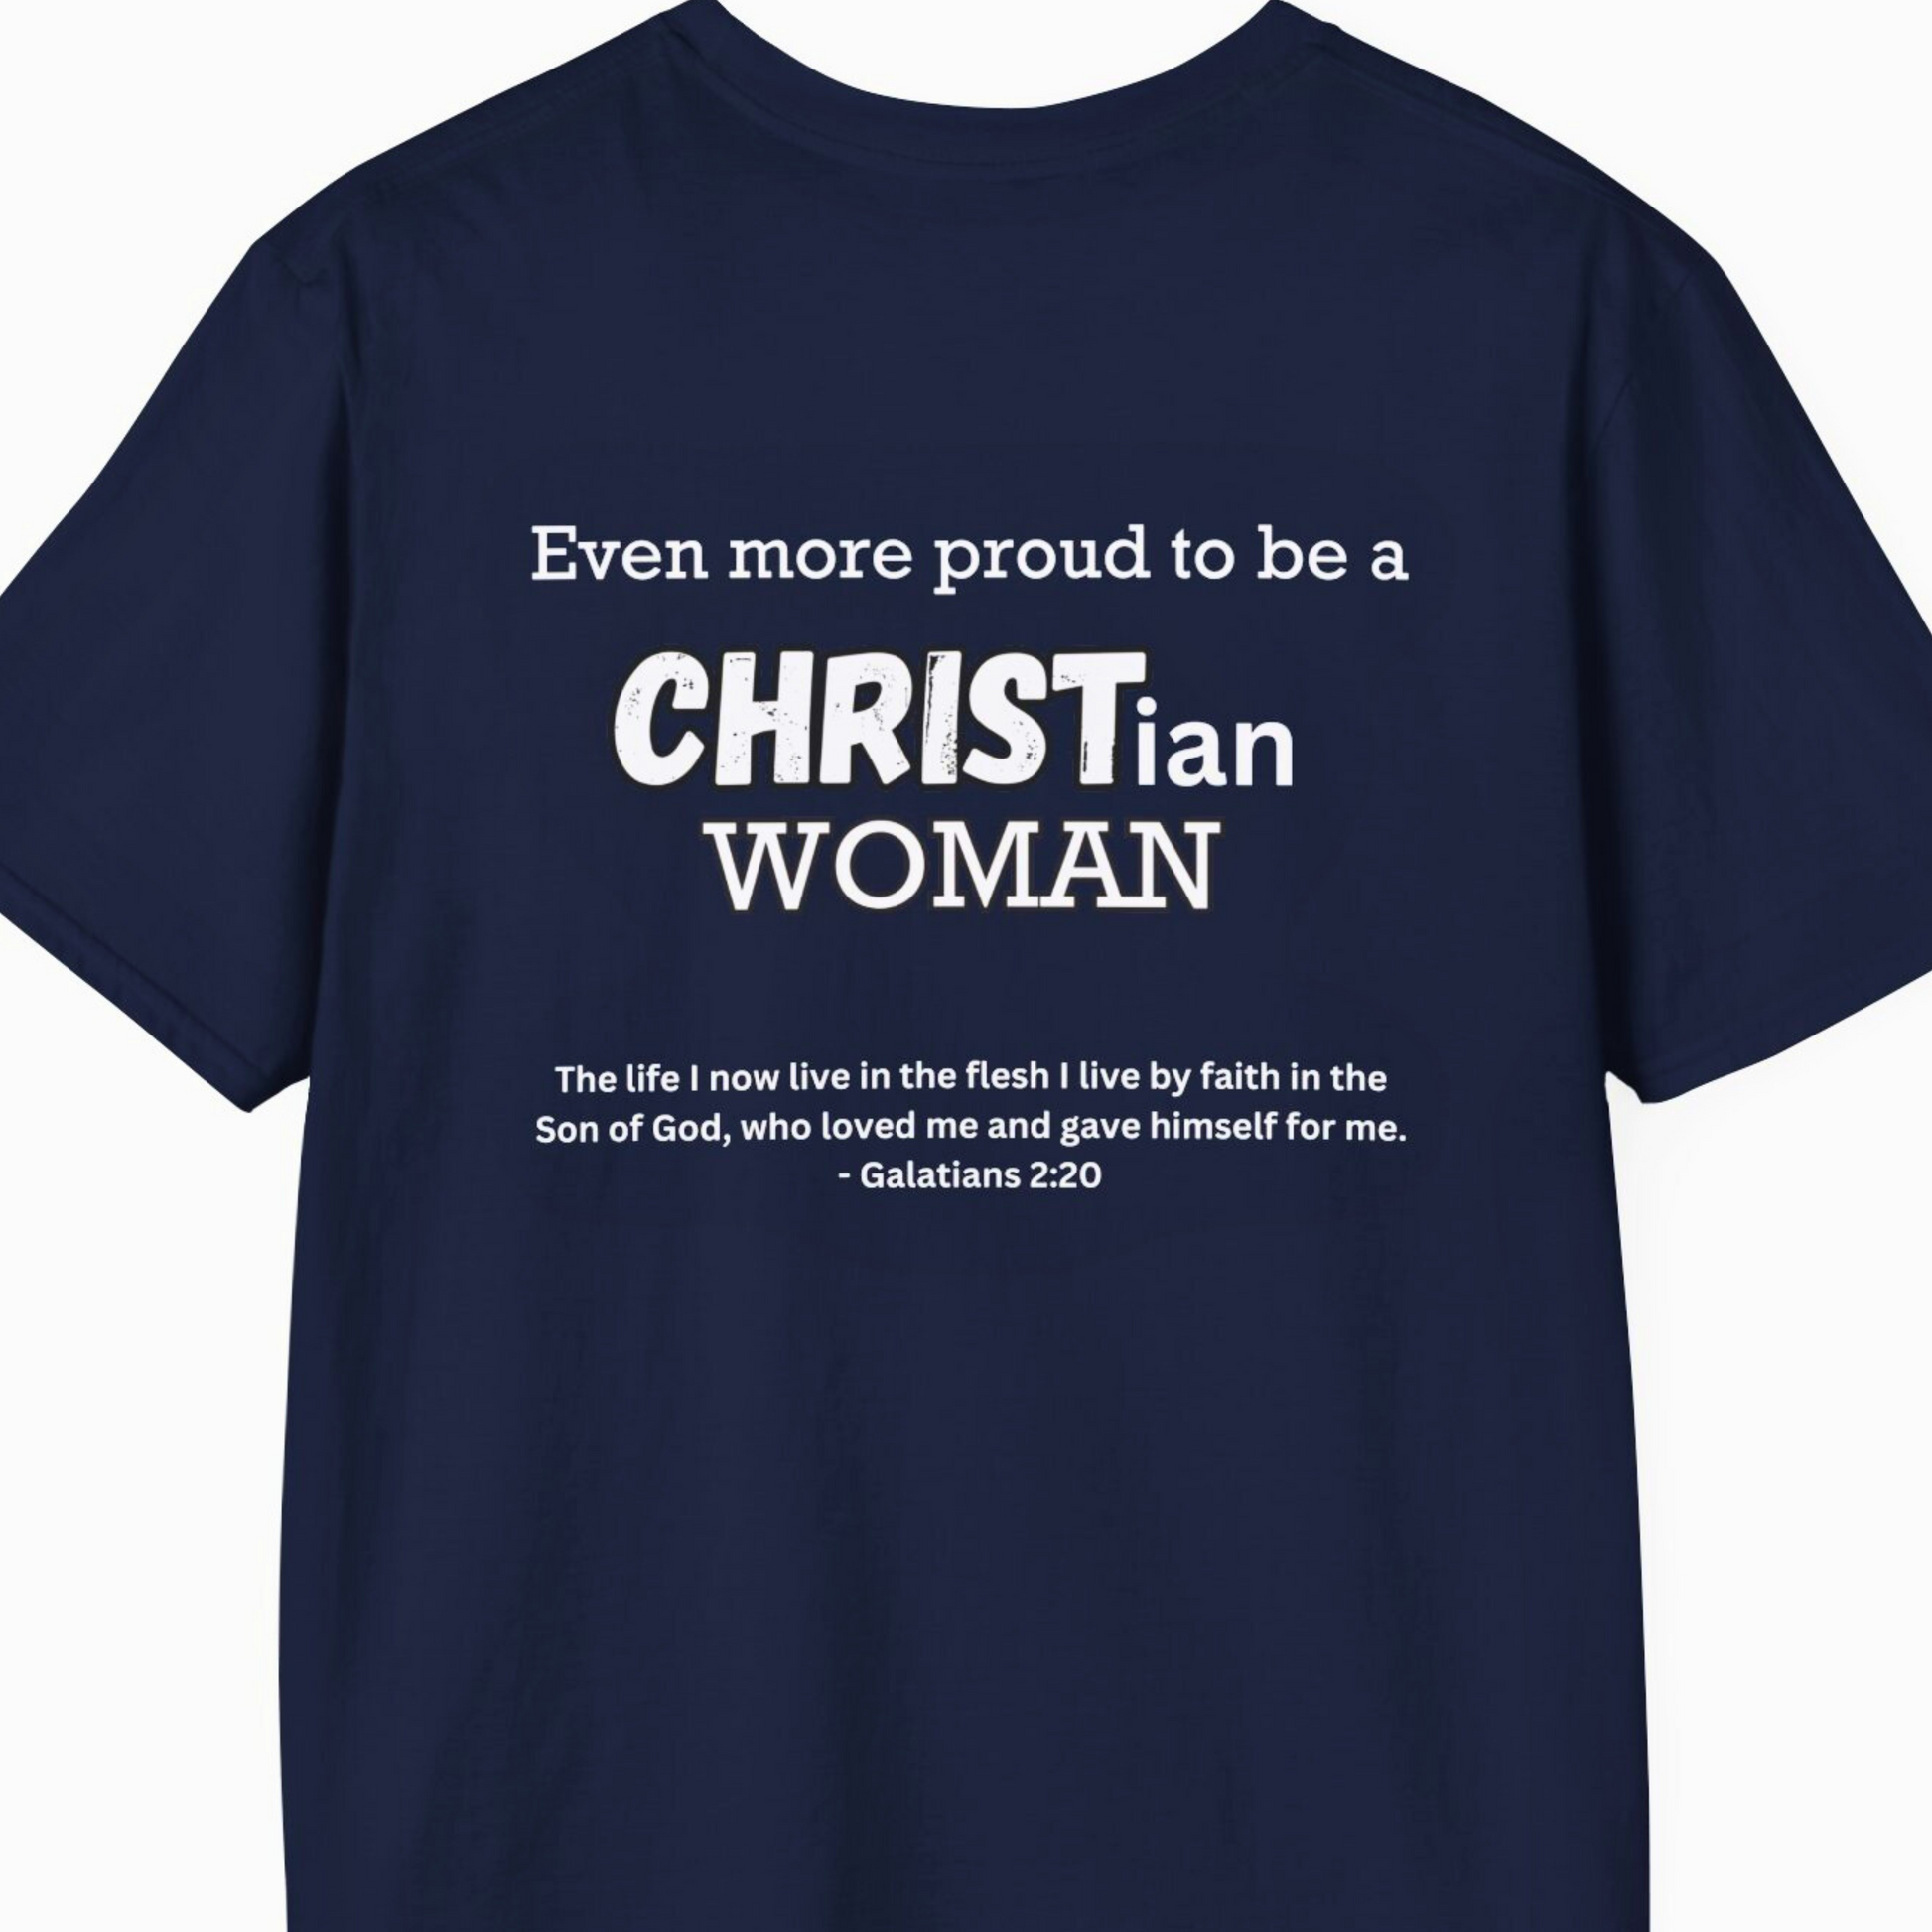 Introducing the Navy 'Proud to be a Black Christian Woman' T-shirt - Faith Fashion, available exclusively at Triumph Tees. This empowering tee not only celebrates faith and Black History but also adds a touch of style to your wardrobe. Available in various sizes, this t-shirt is a perfect addition to your collection. #faithfashion #blackhistorytshirt